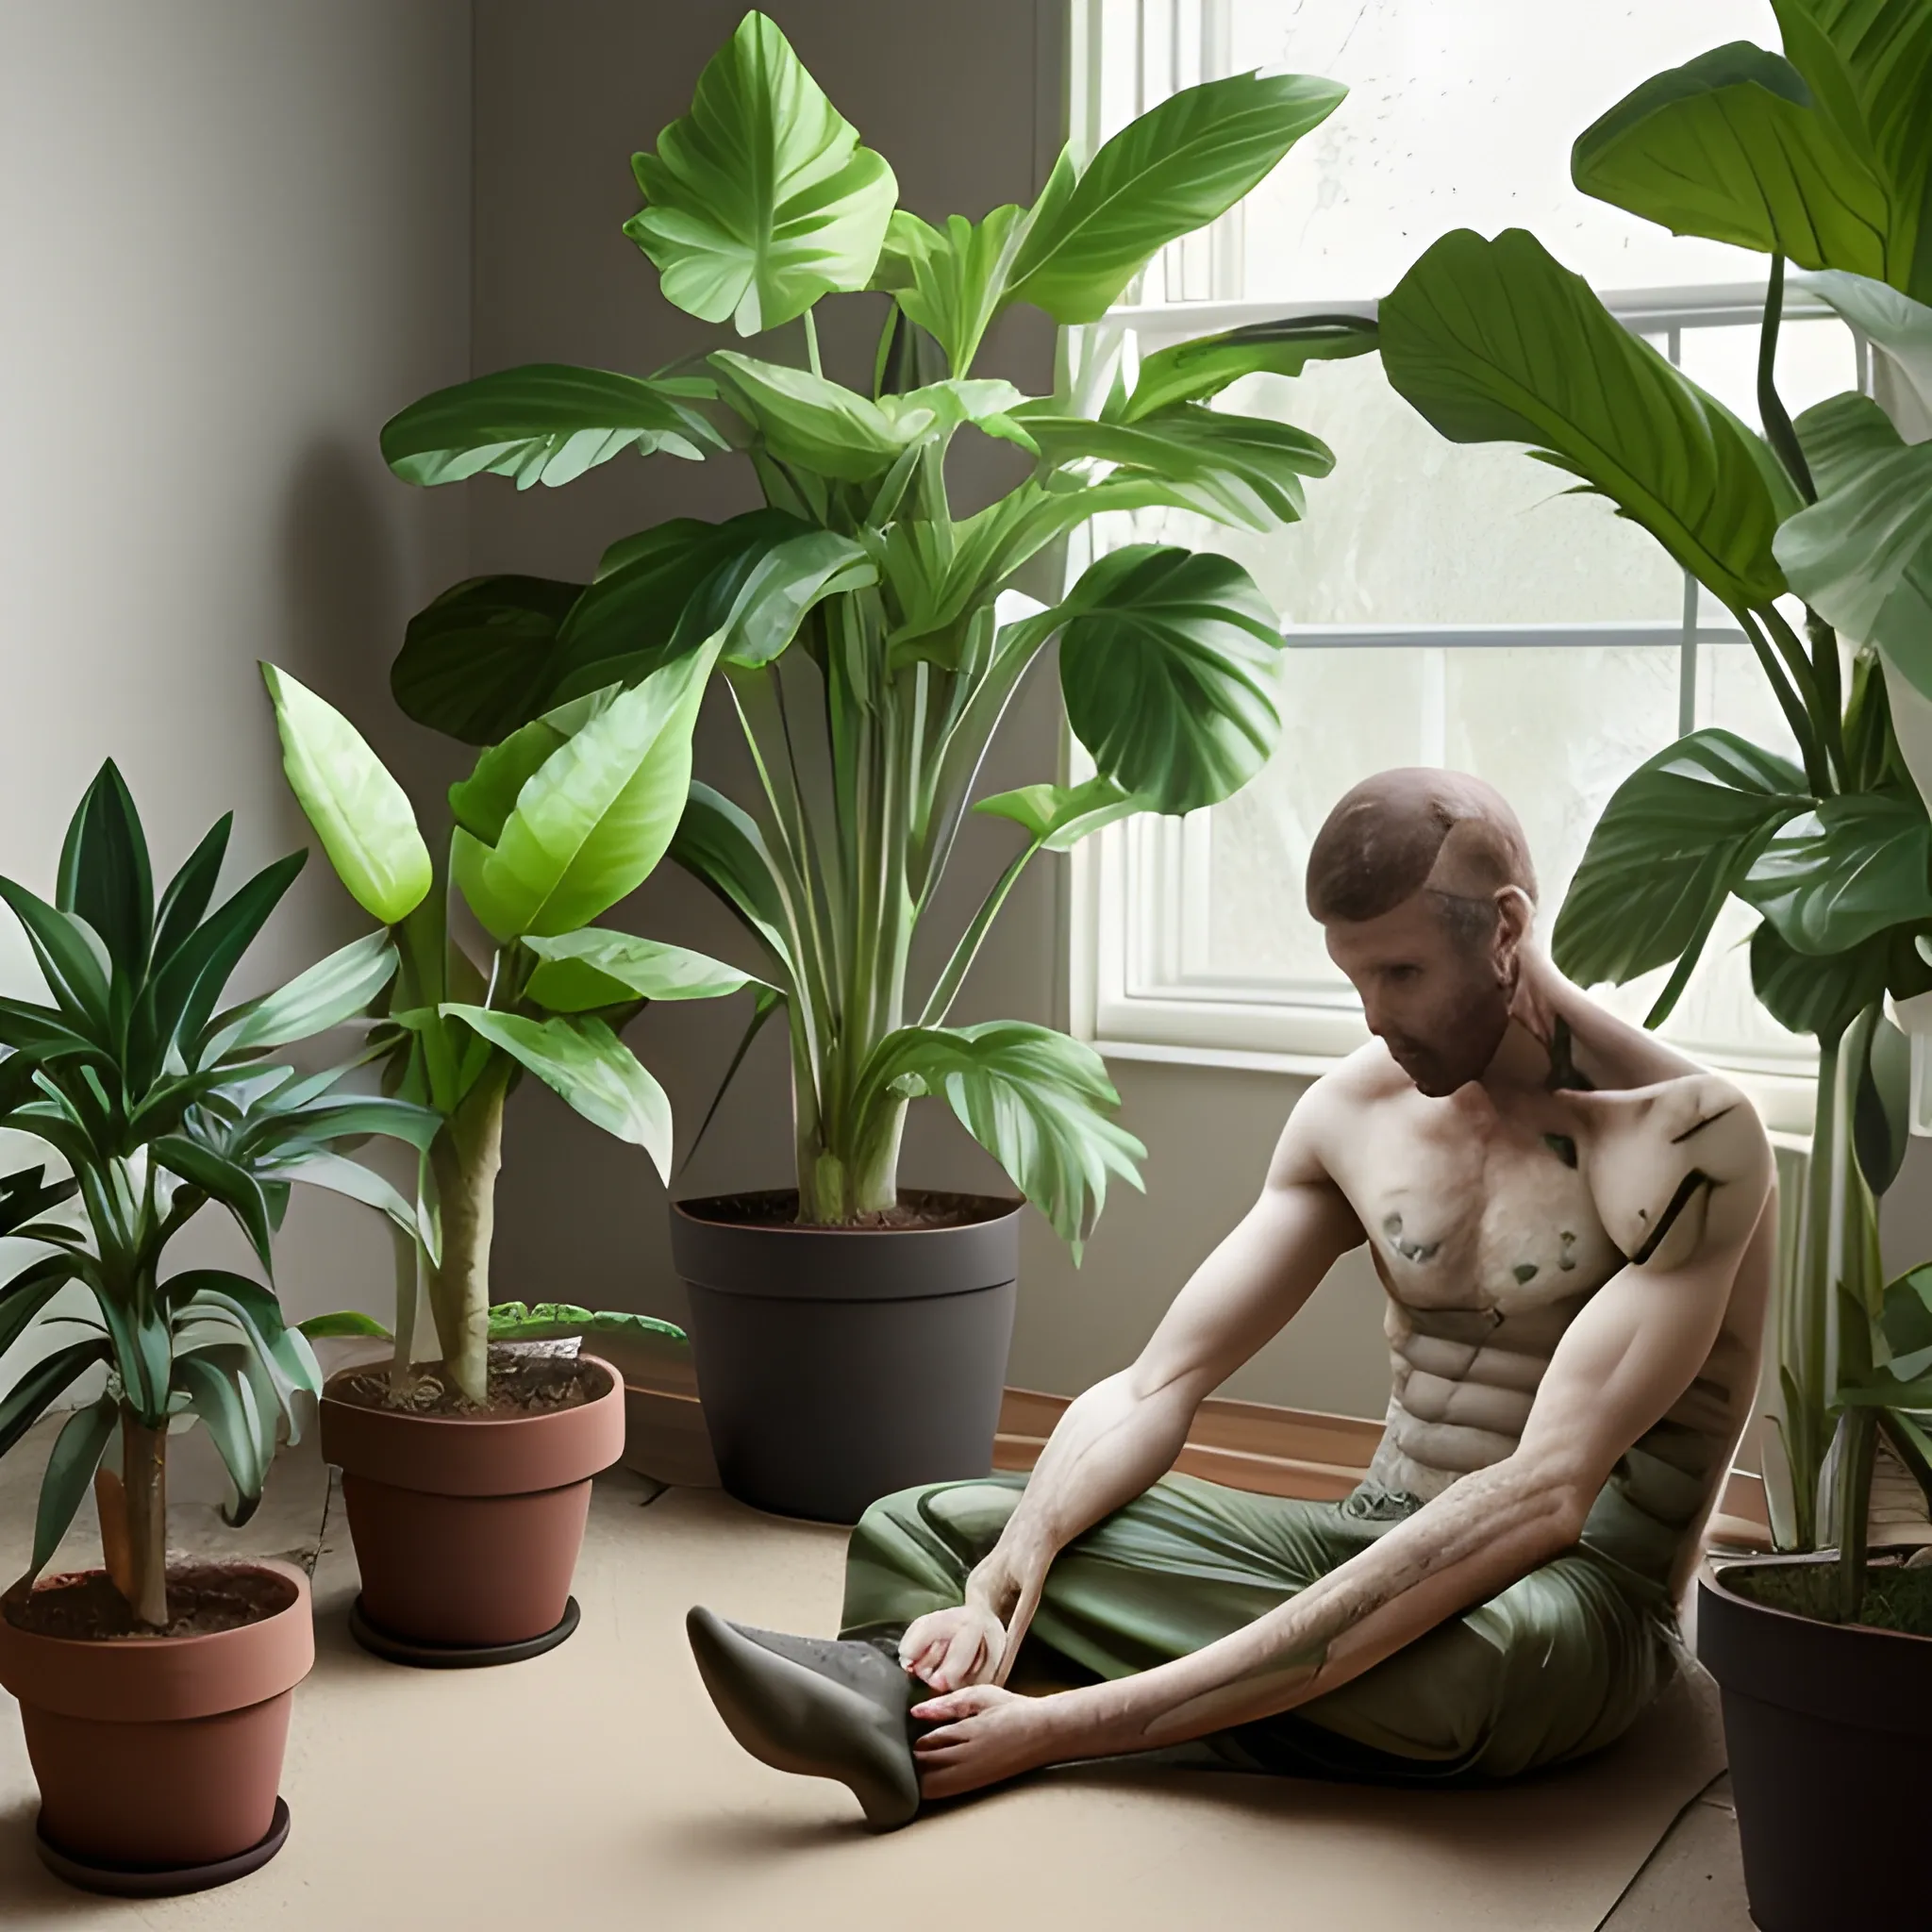 plants groing on a human sitting and killing him